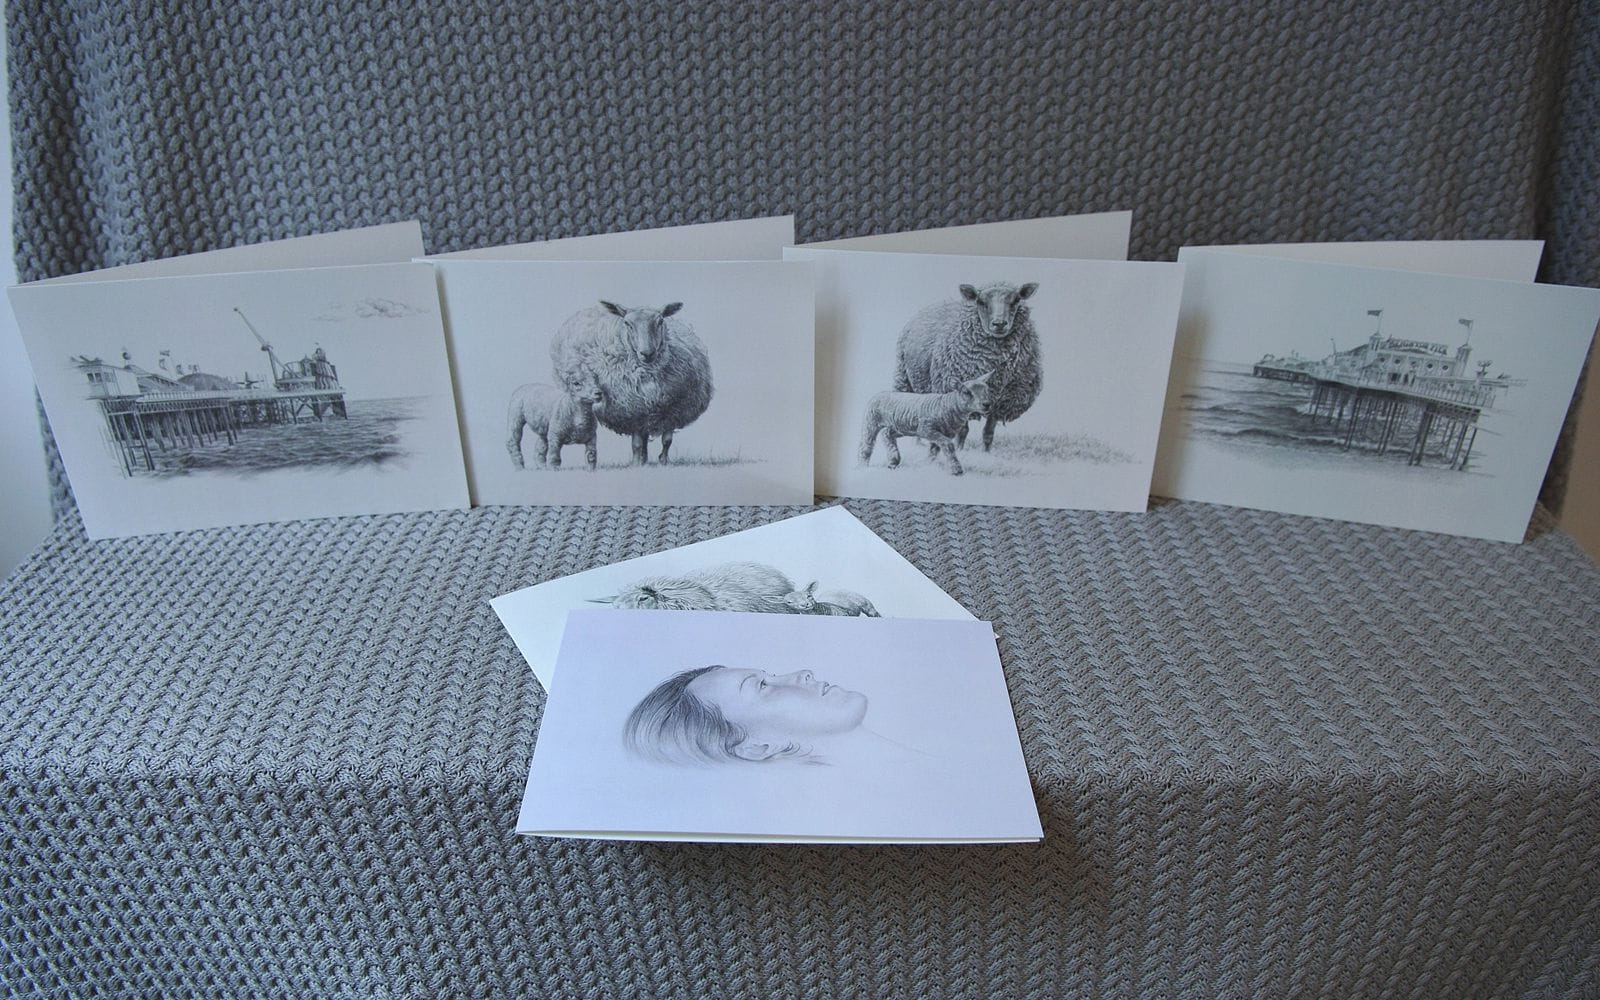 A selection of black & white greeting cards arranged on a table. Some of the greeting cards feature pencil drawings of sheep.